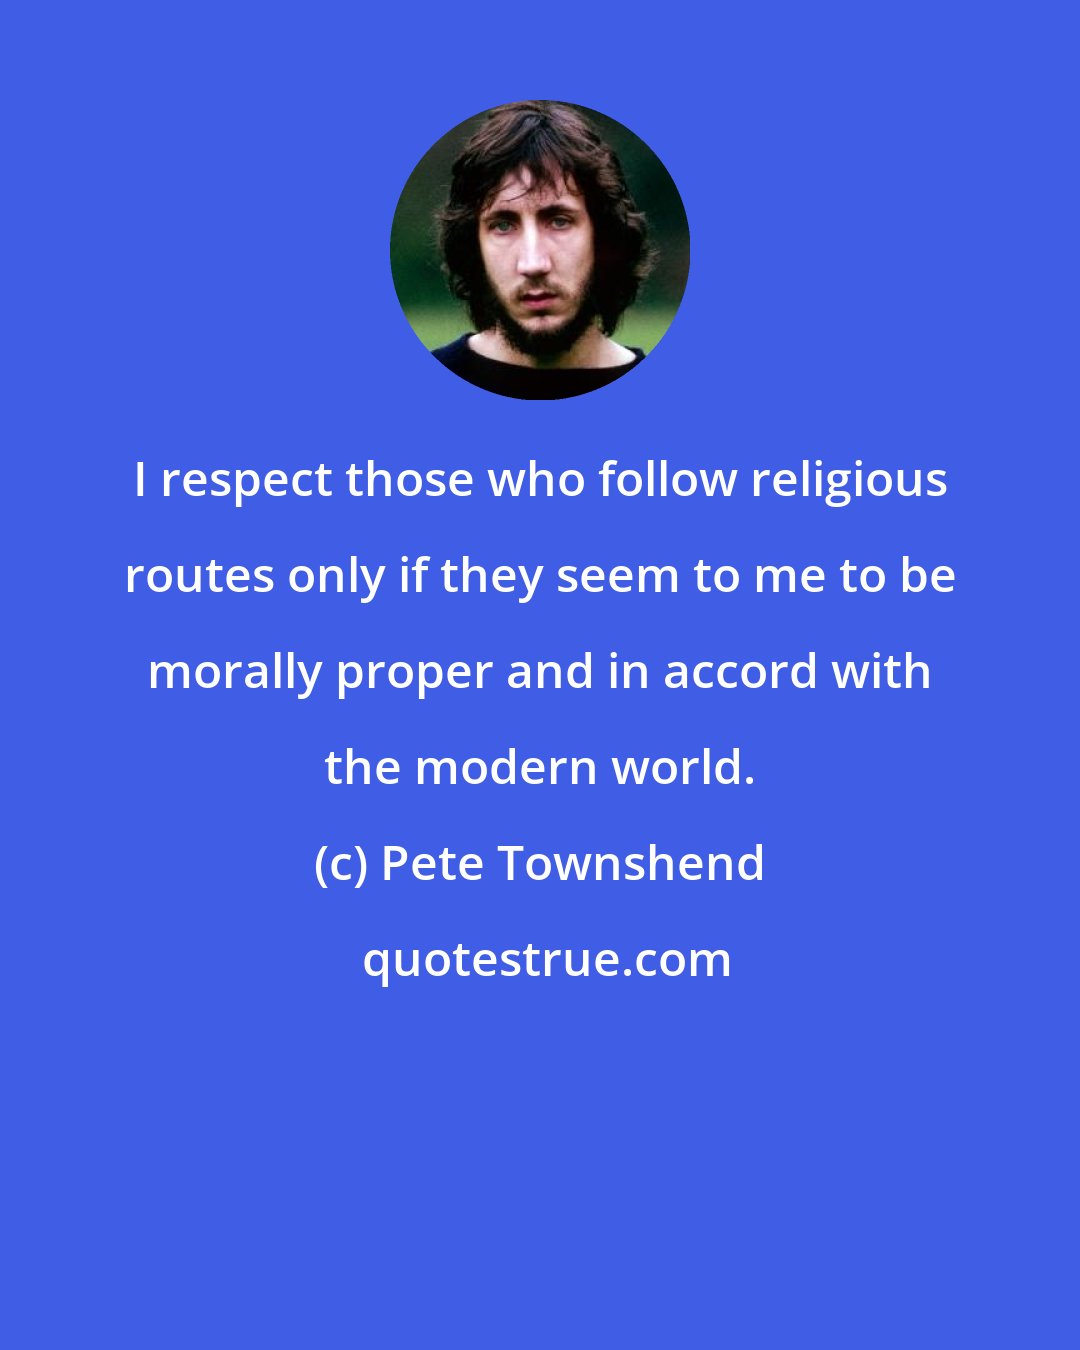 Pete Townshend: I respect those who follow religious routes only if they seem to me to be morally proper and in accord with the modern world.